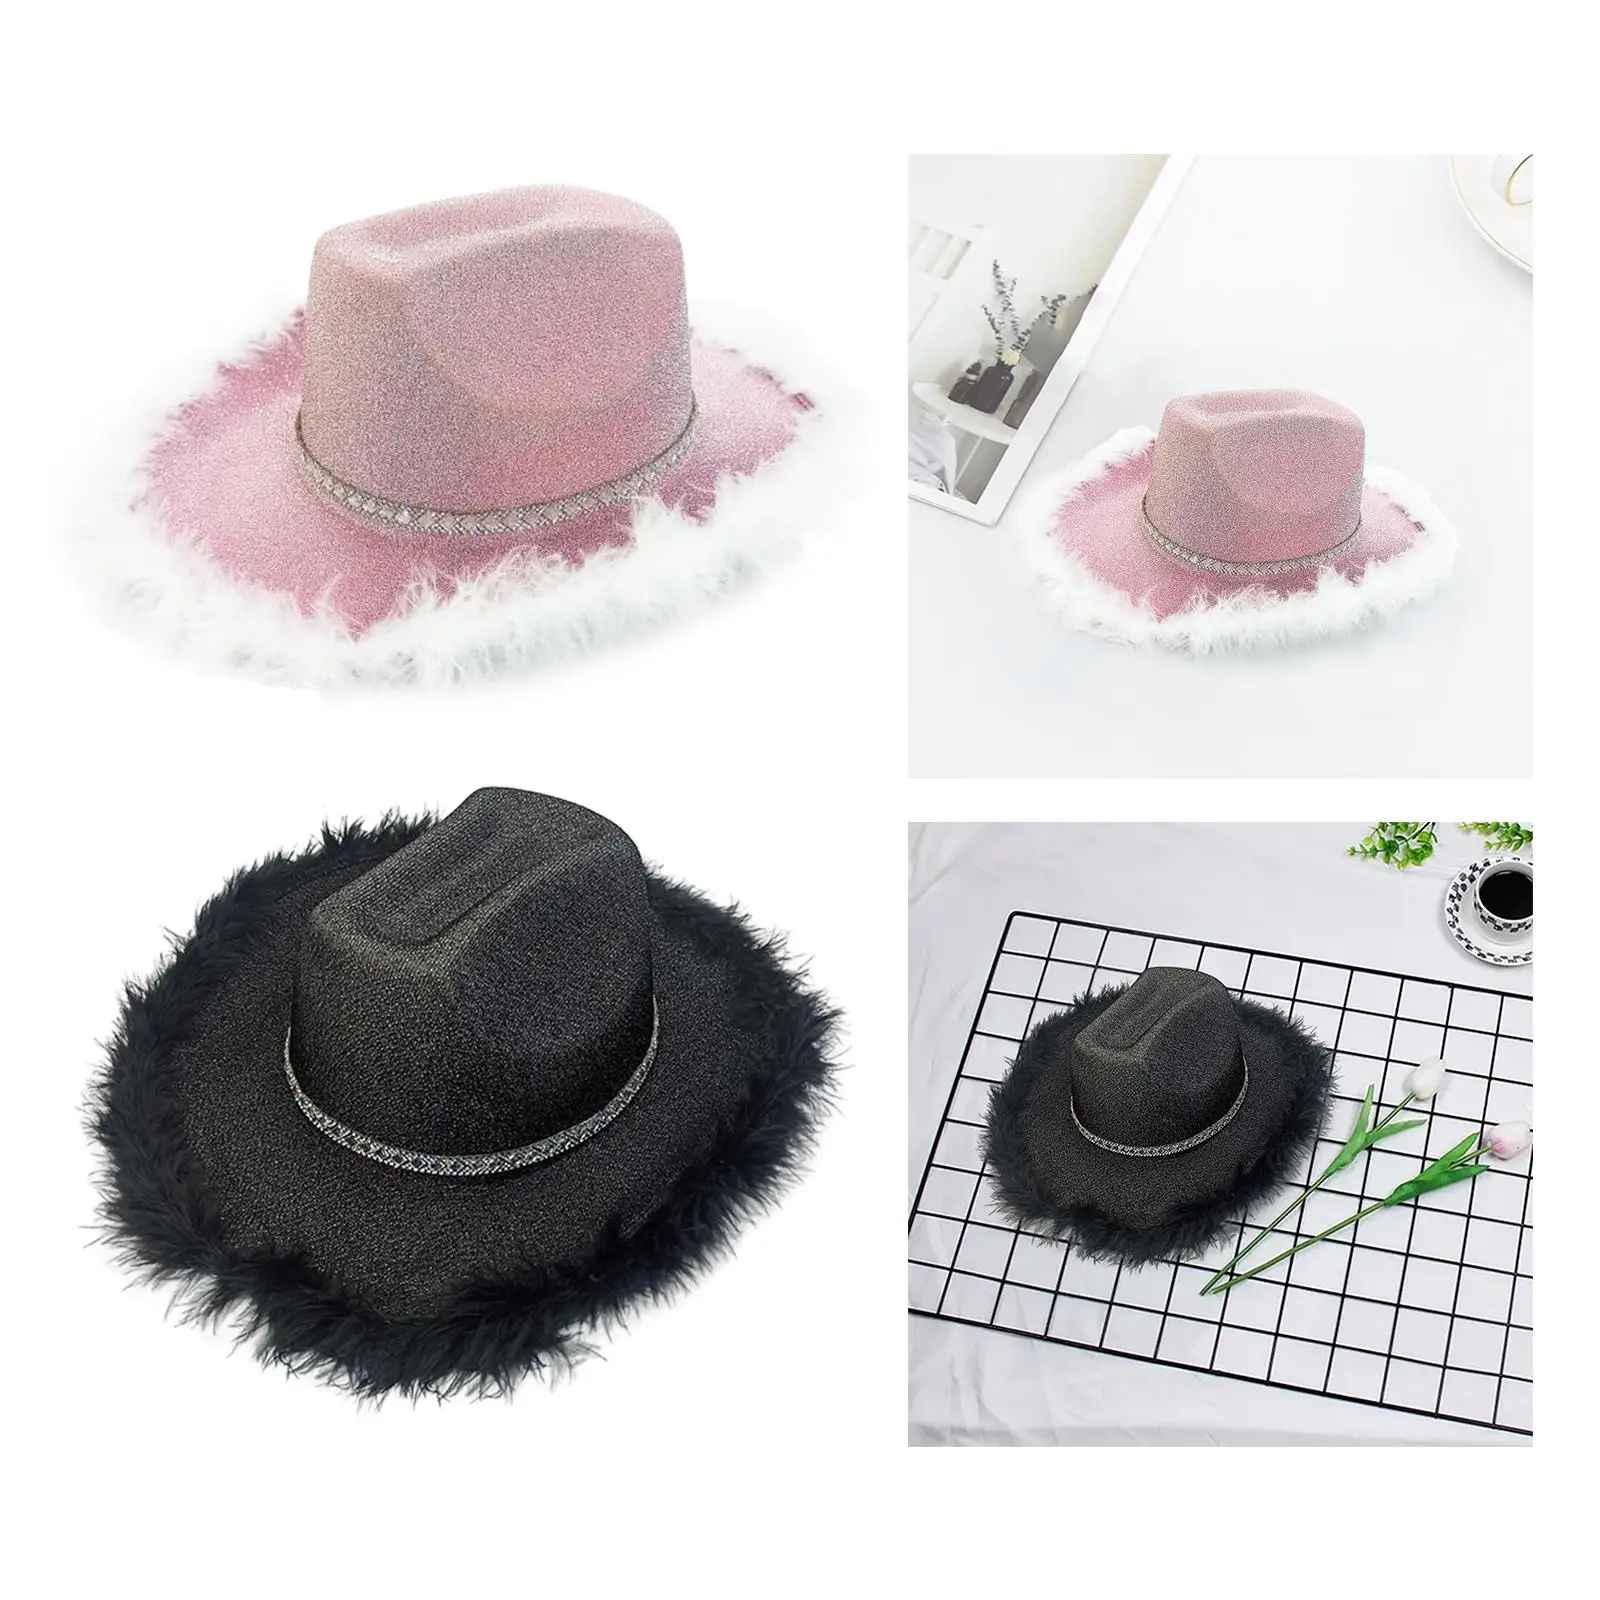 Cowboy Hat Fancy Dress Cowgirl Hat with Artificial Feather Trim for Adult